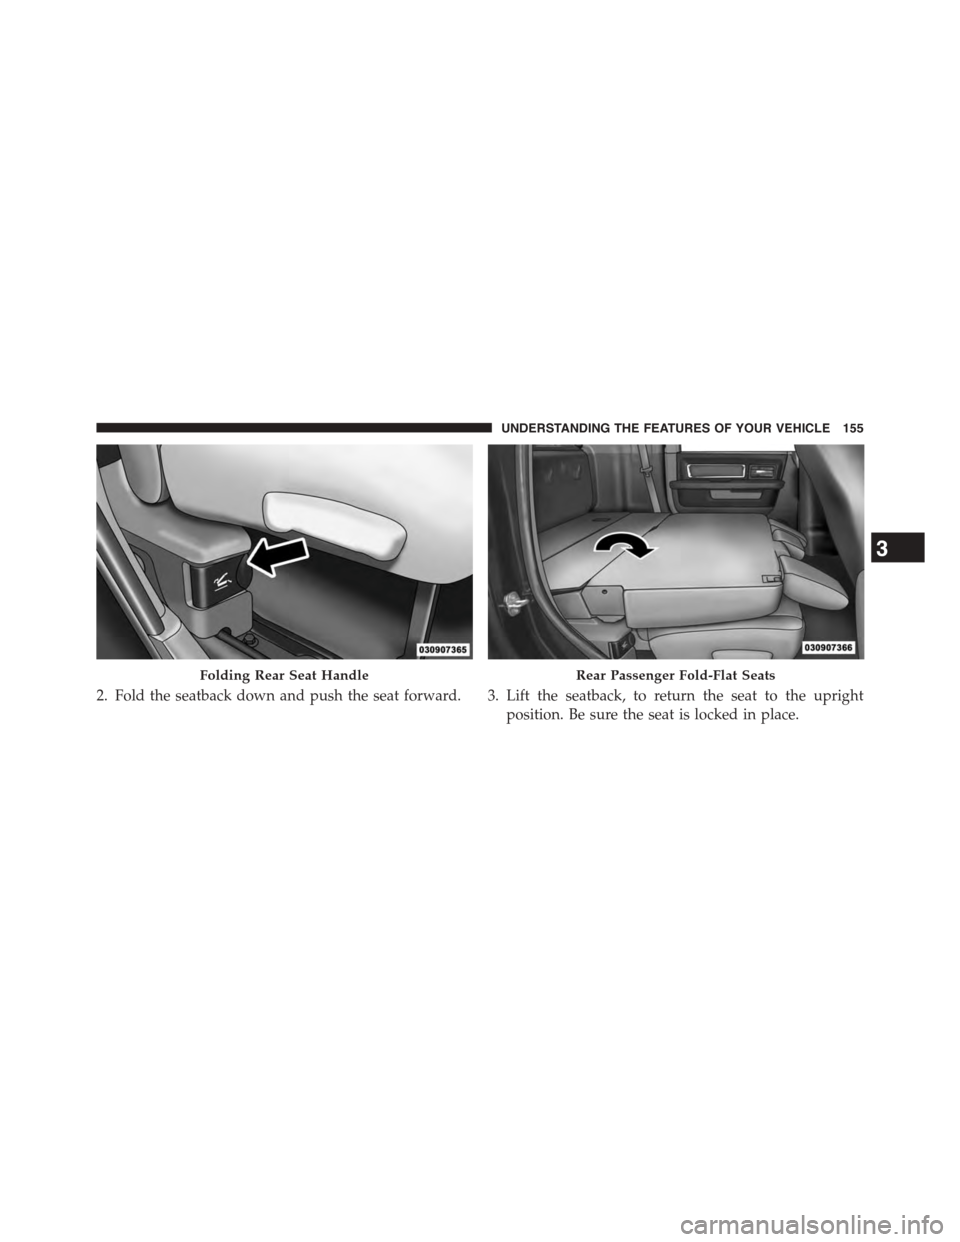 Ram 1500 2015  Owners Manual 2. Fold the seatback down and push the seat forward. 3. Lift the seatback, to return the seat to the upright
position. Be sure the seat is locked in place.
Folding Rear Seat HandleRear Passenger Fold-